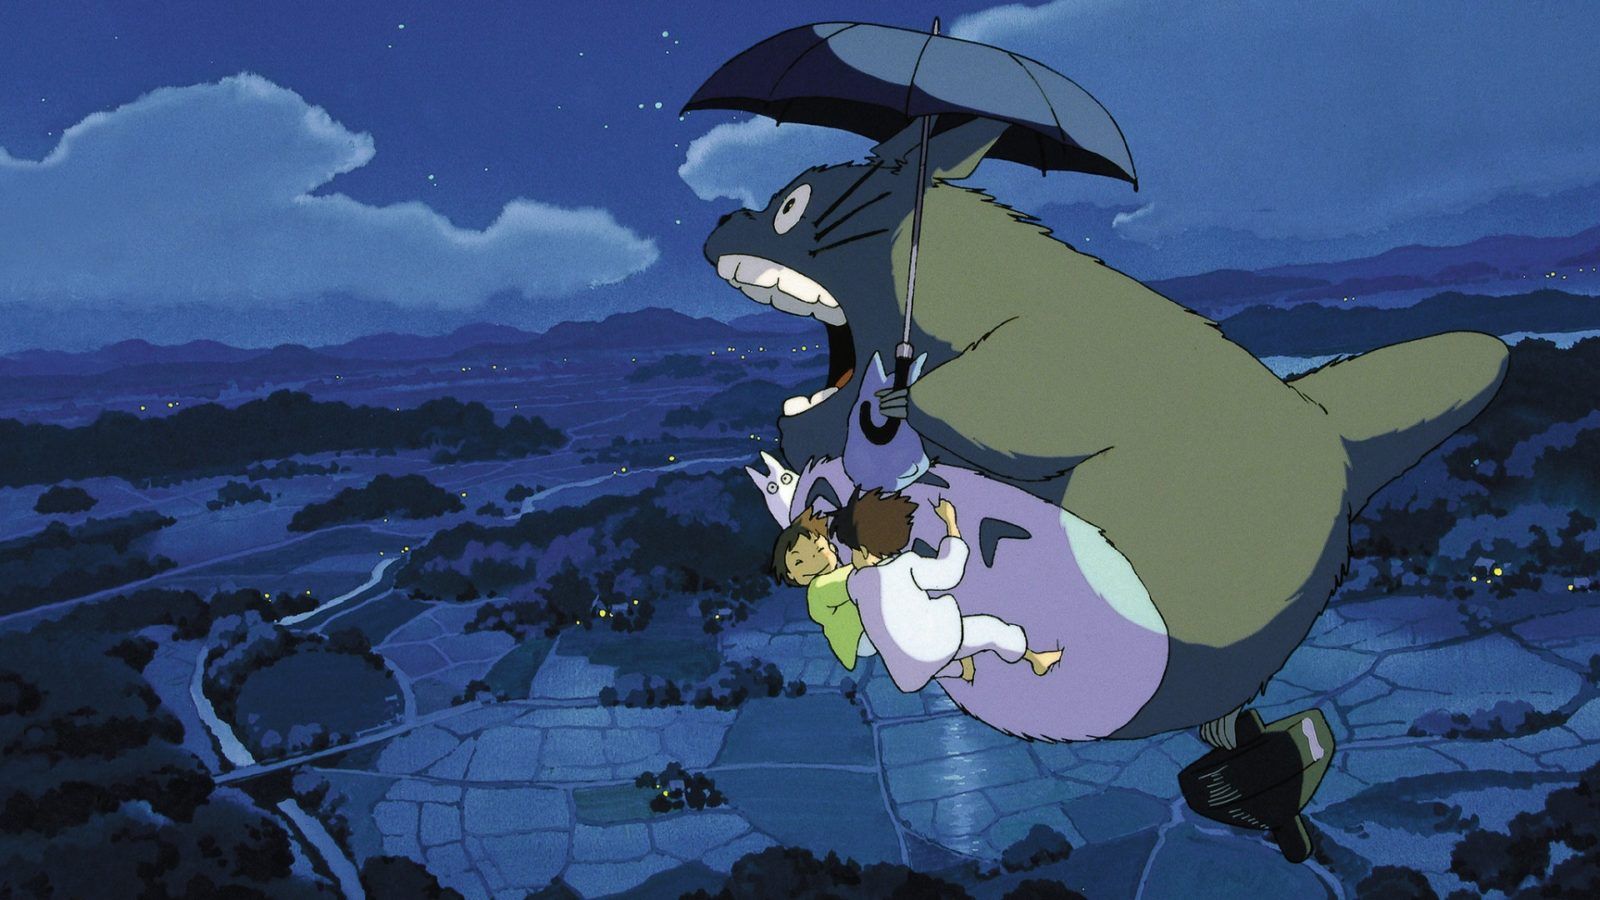 Studio Ghibli’s ‘My Neighbour Totoro’ is getting a stage adaptation